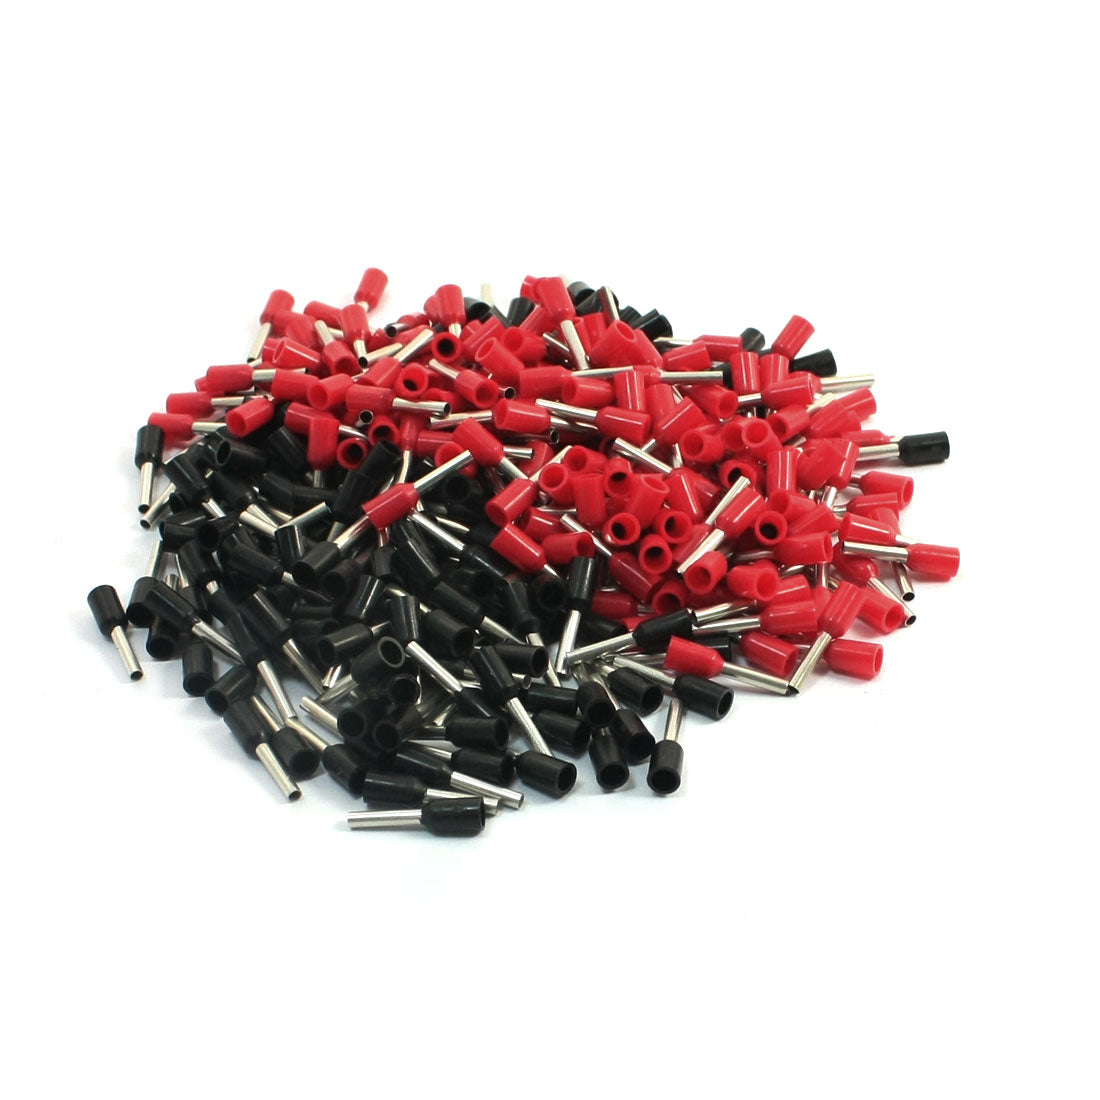 uxcell Uxcell 18 AWG Cable E1008 Red Black Pre Insulating Ferrules Wiring Connectors 380 Pcs